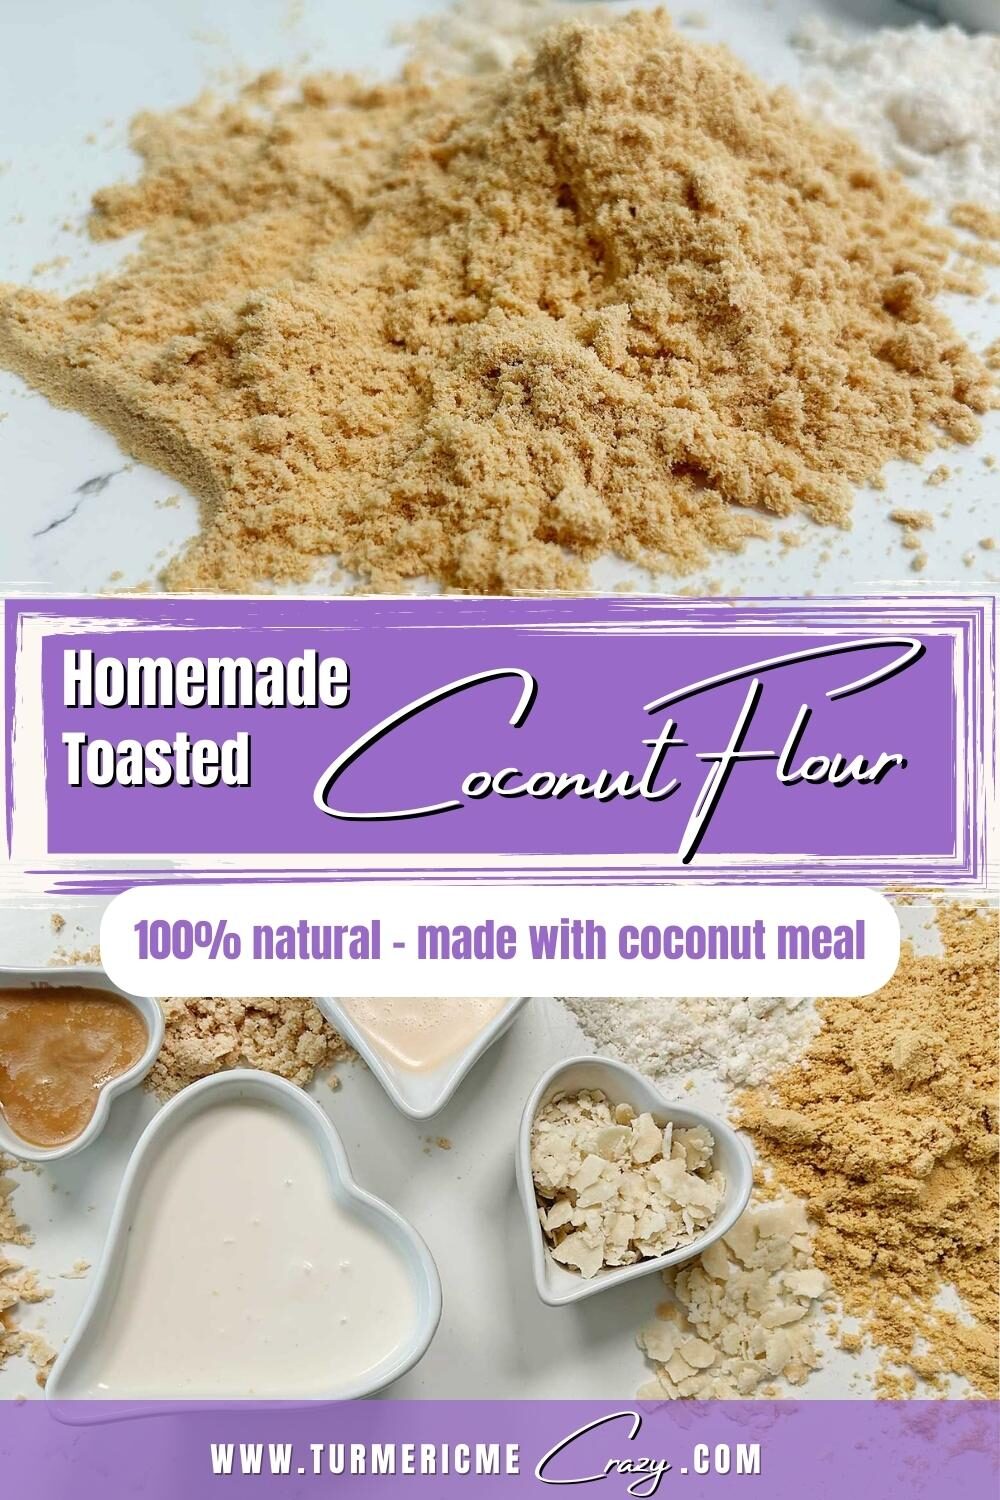 Easily make your coconut flour from the left over coconut meal after making coconut milk. Give it a try and I promise, you'll never buy store bought again!